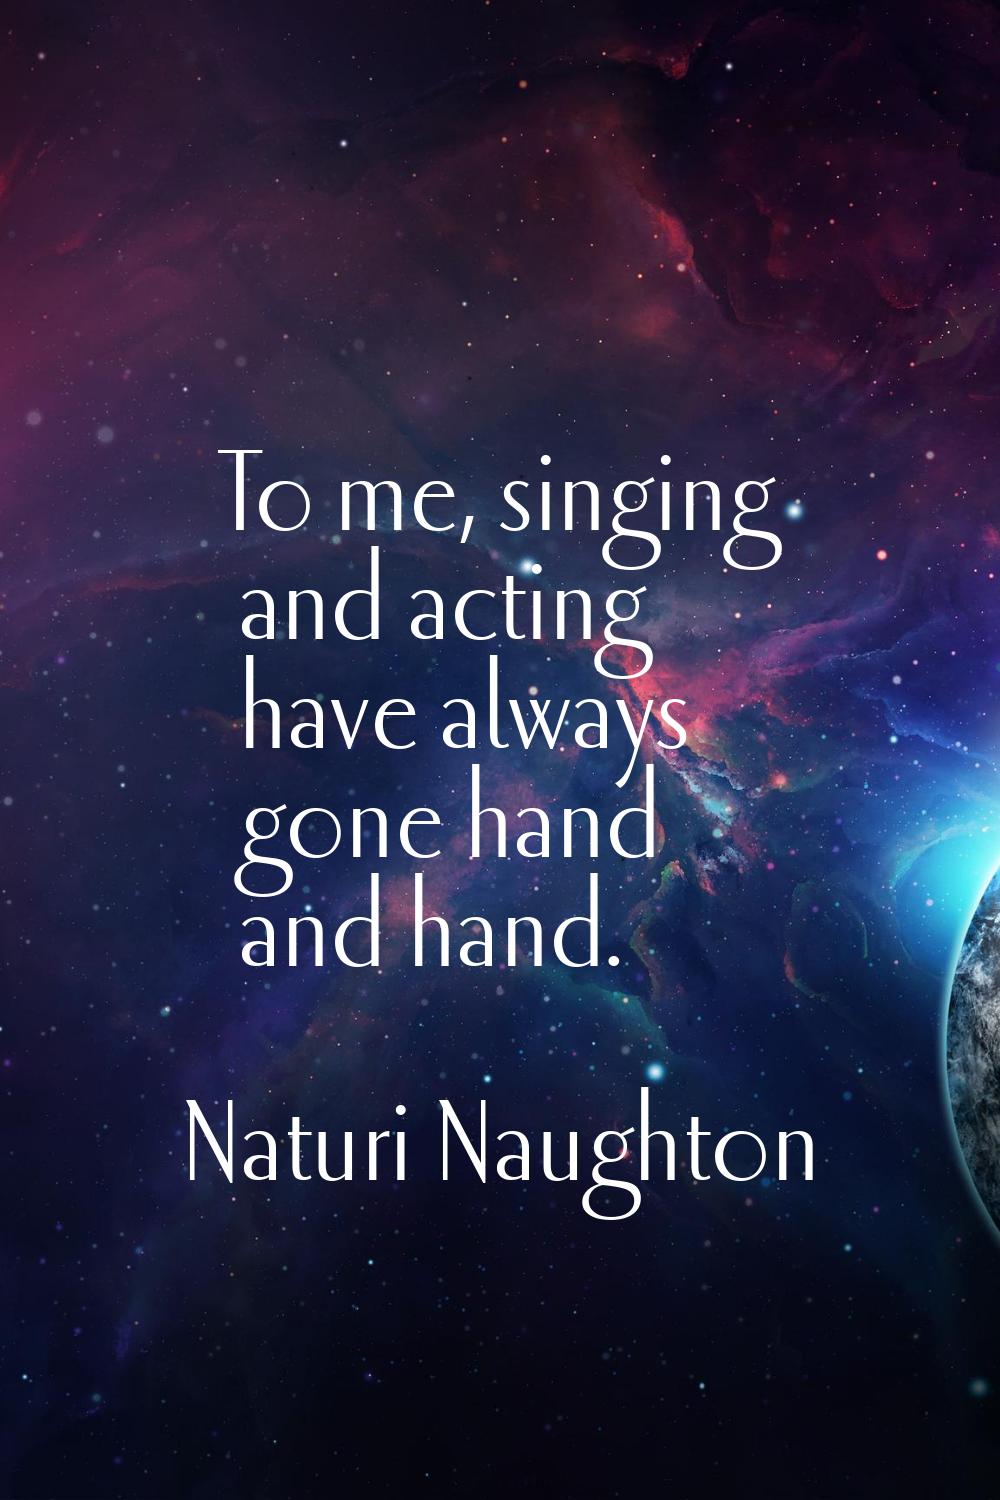 To me, singing and acting have always gone hand and hand.